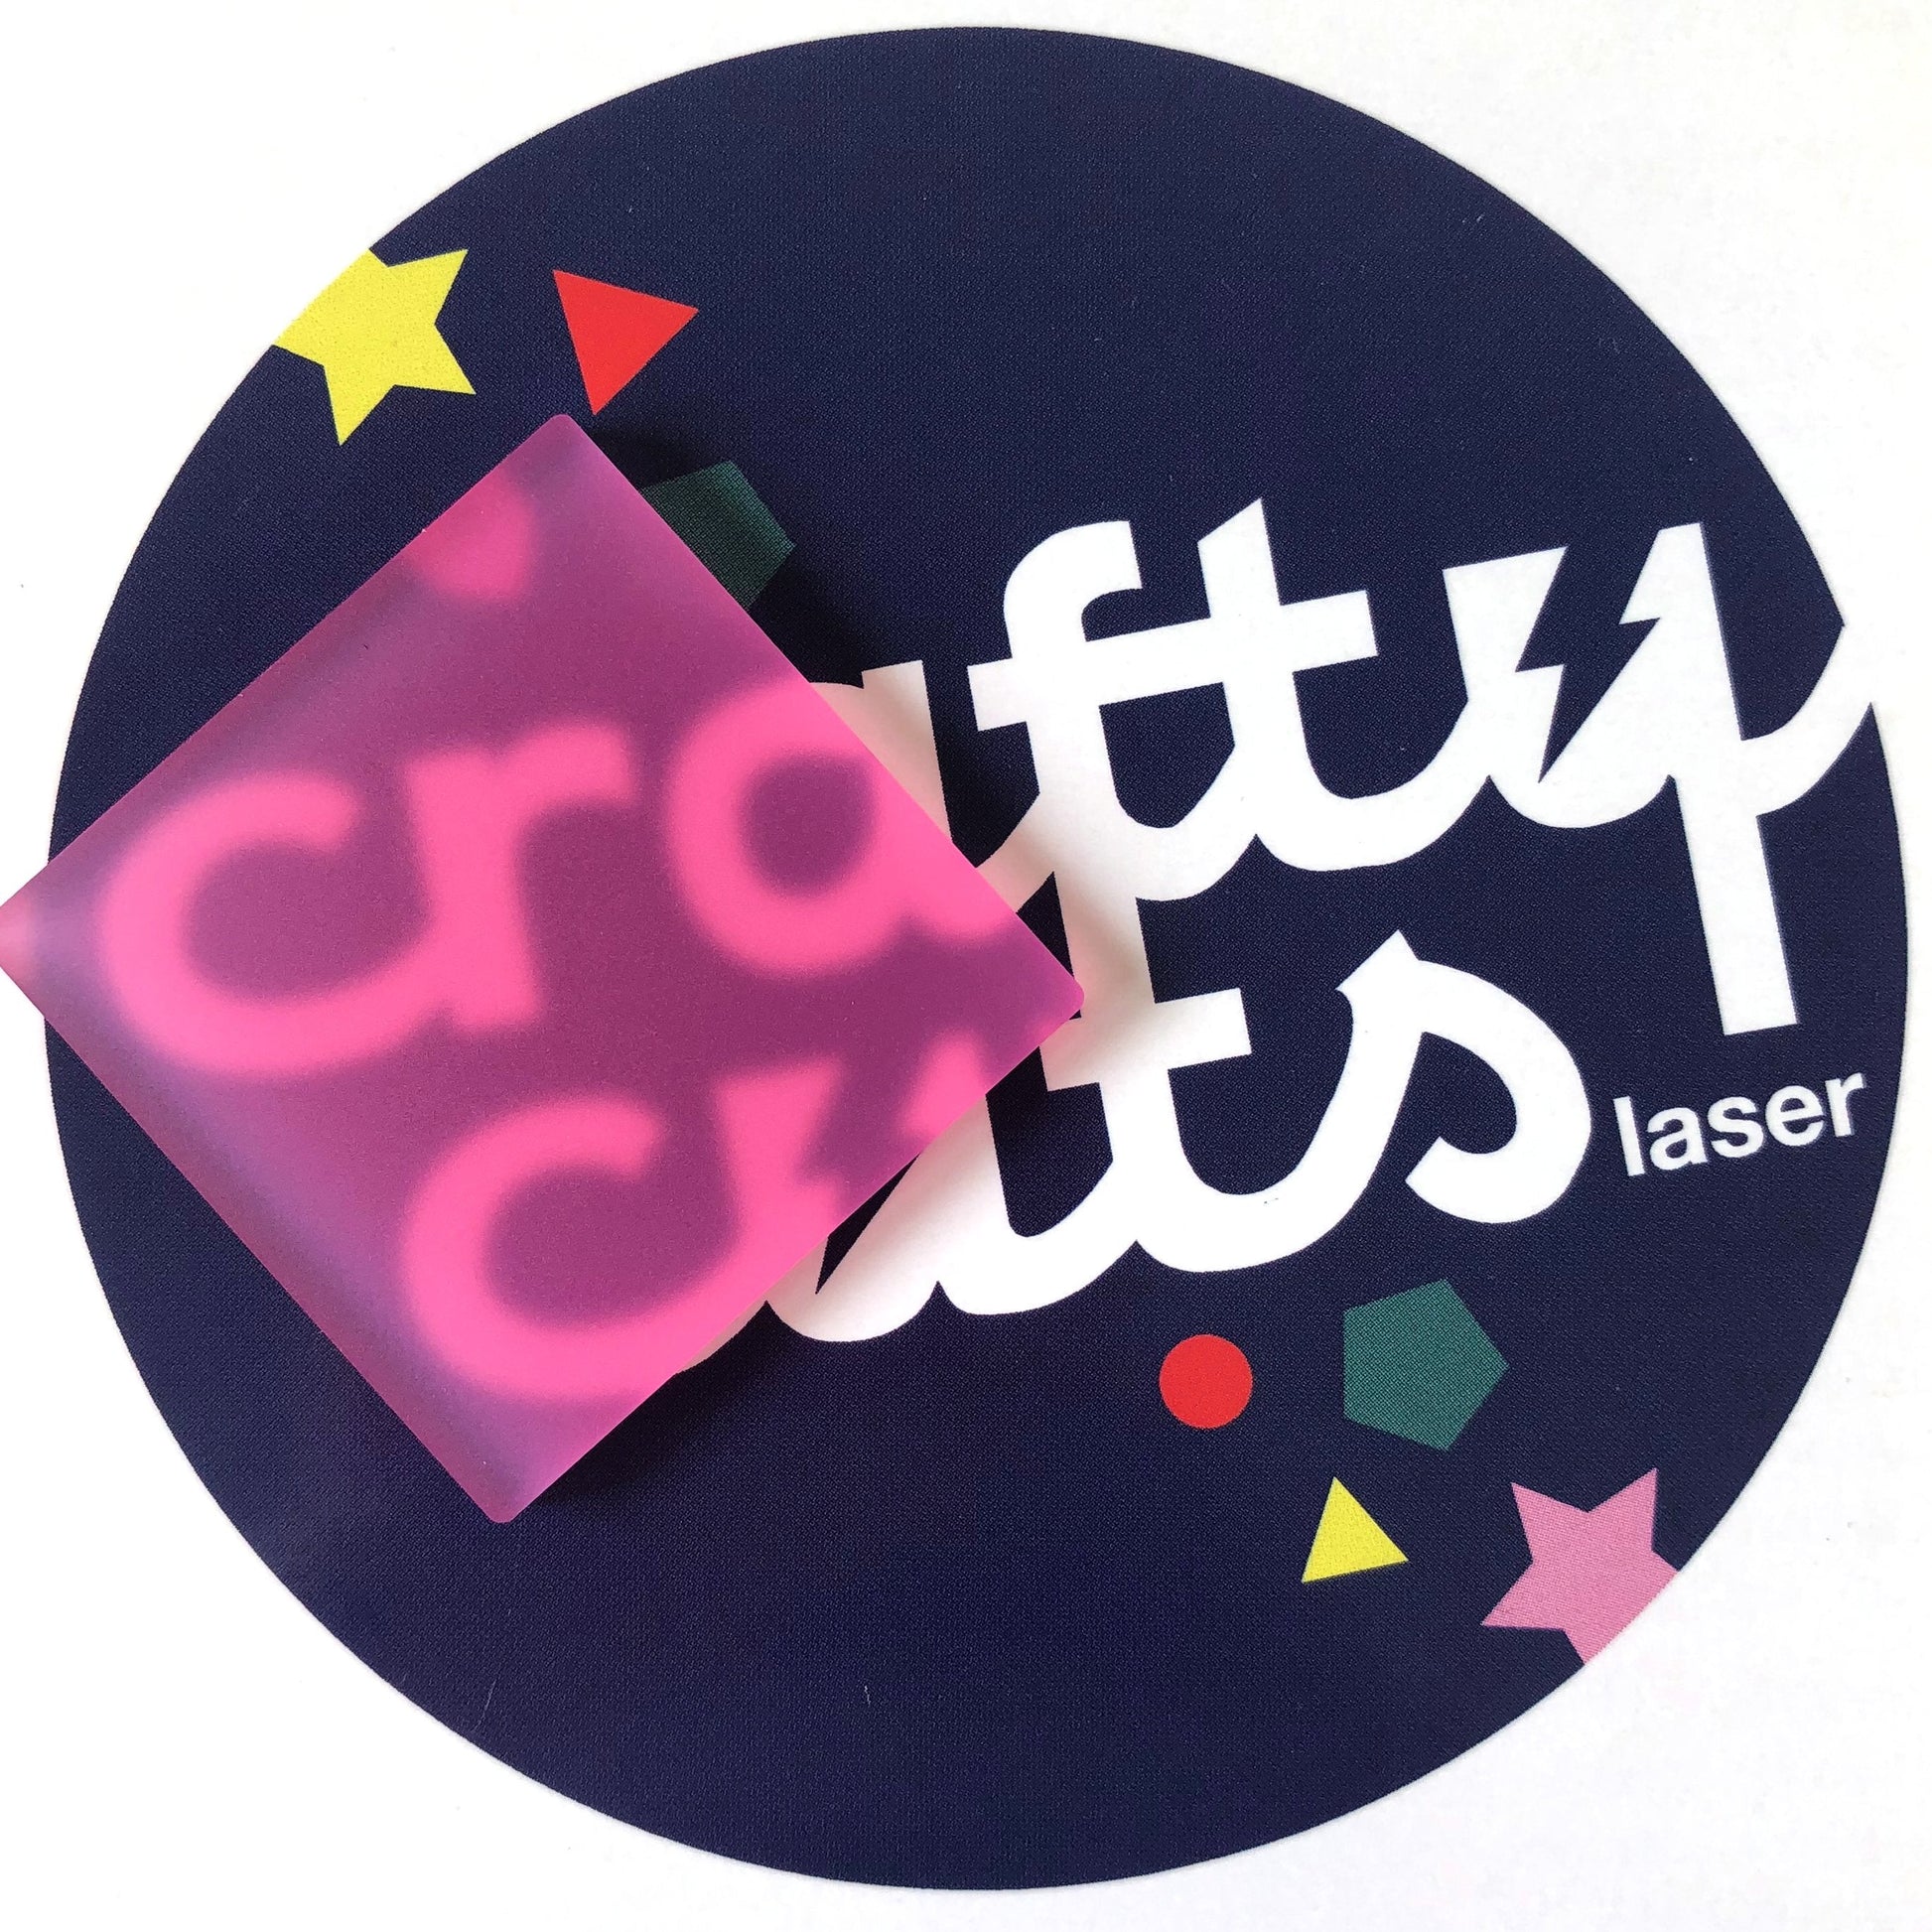 Crafty Cuts Laser Pty Ltd Materials Frosted Acrylic - *Pink Lemonade